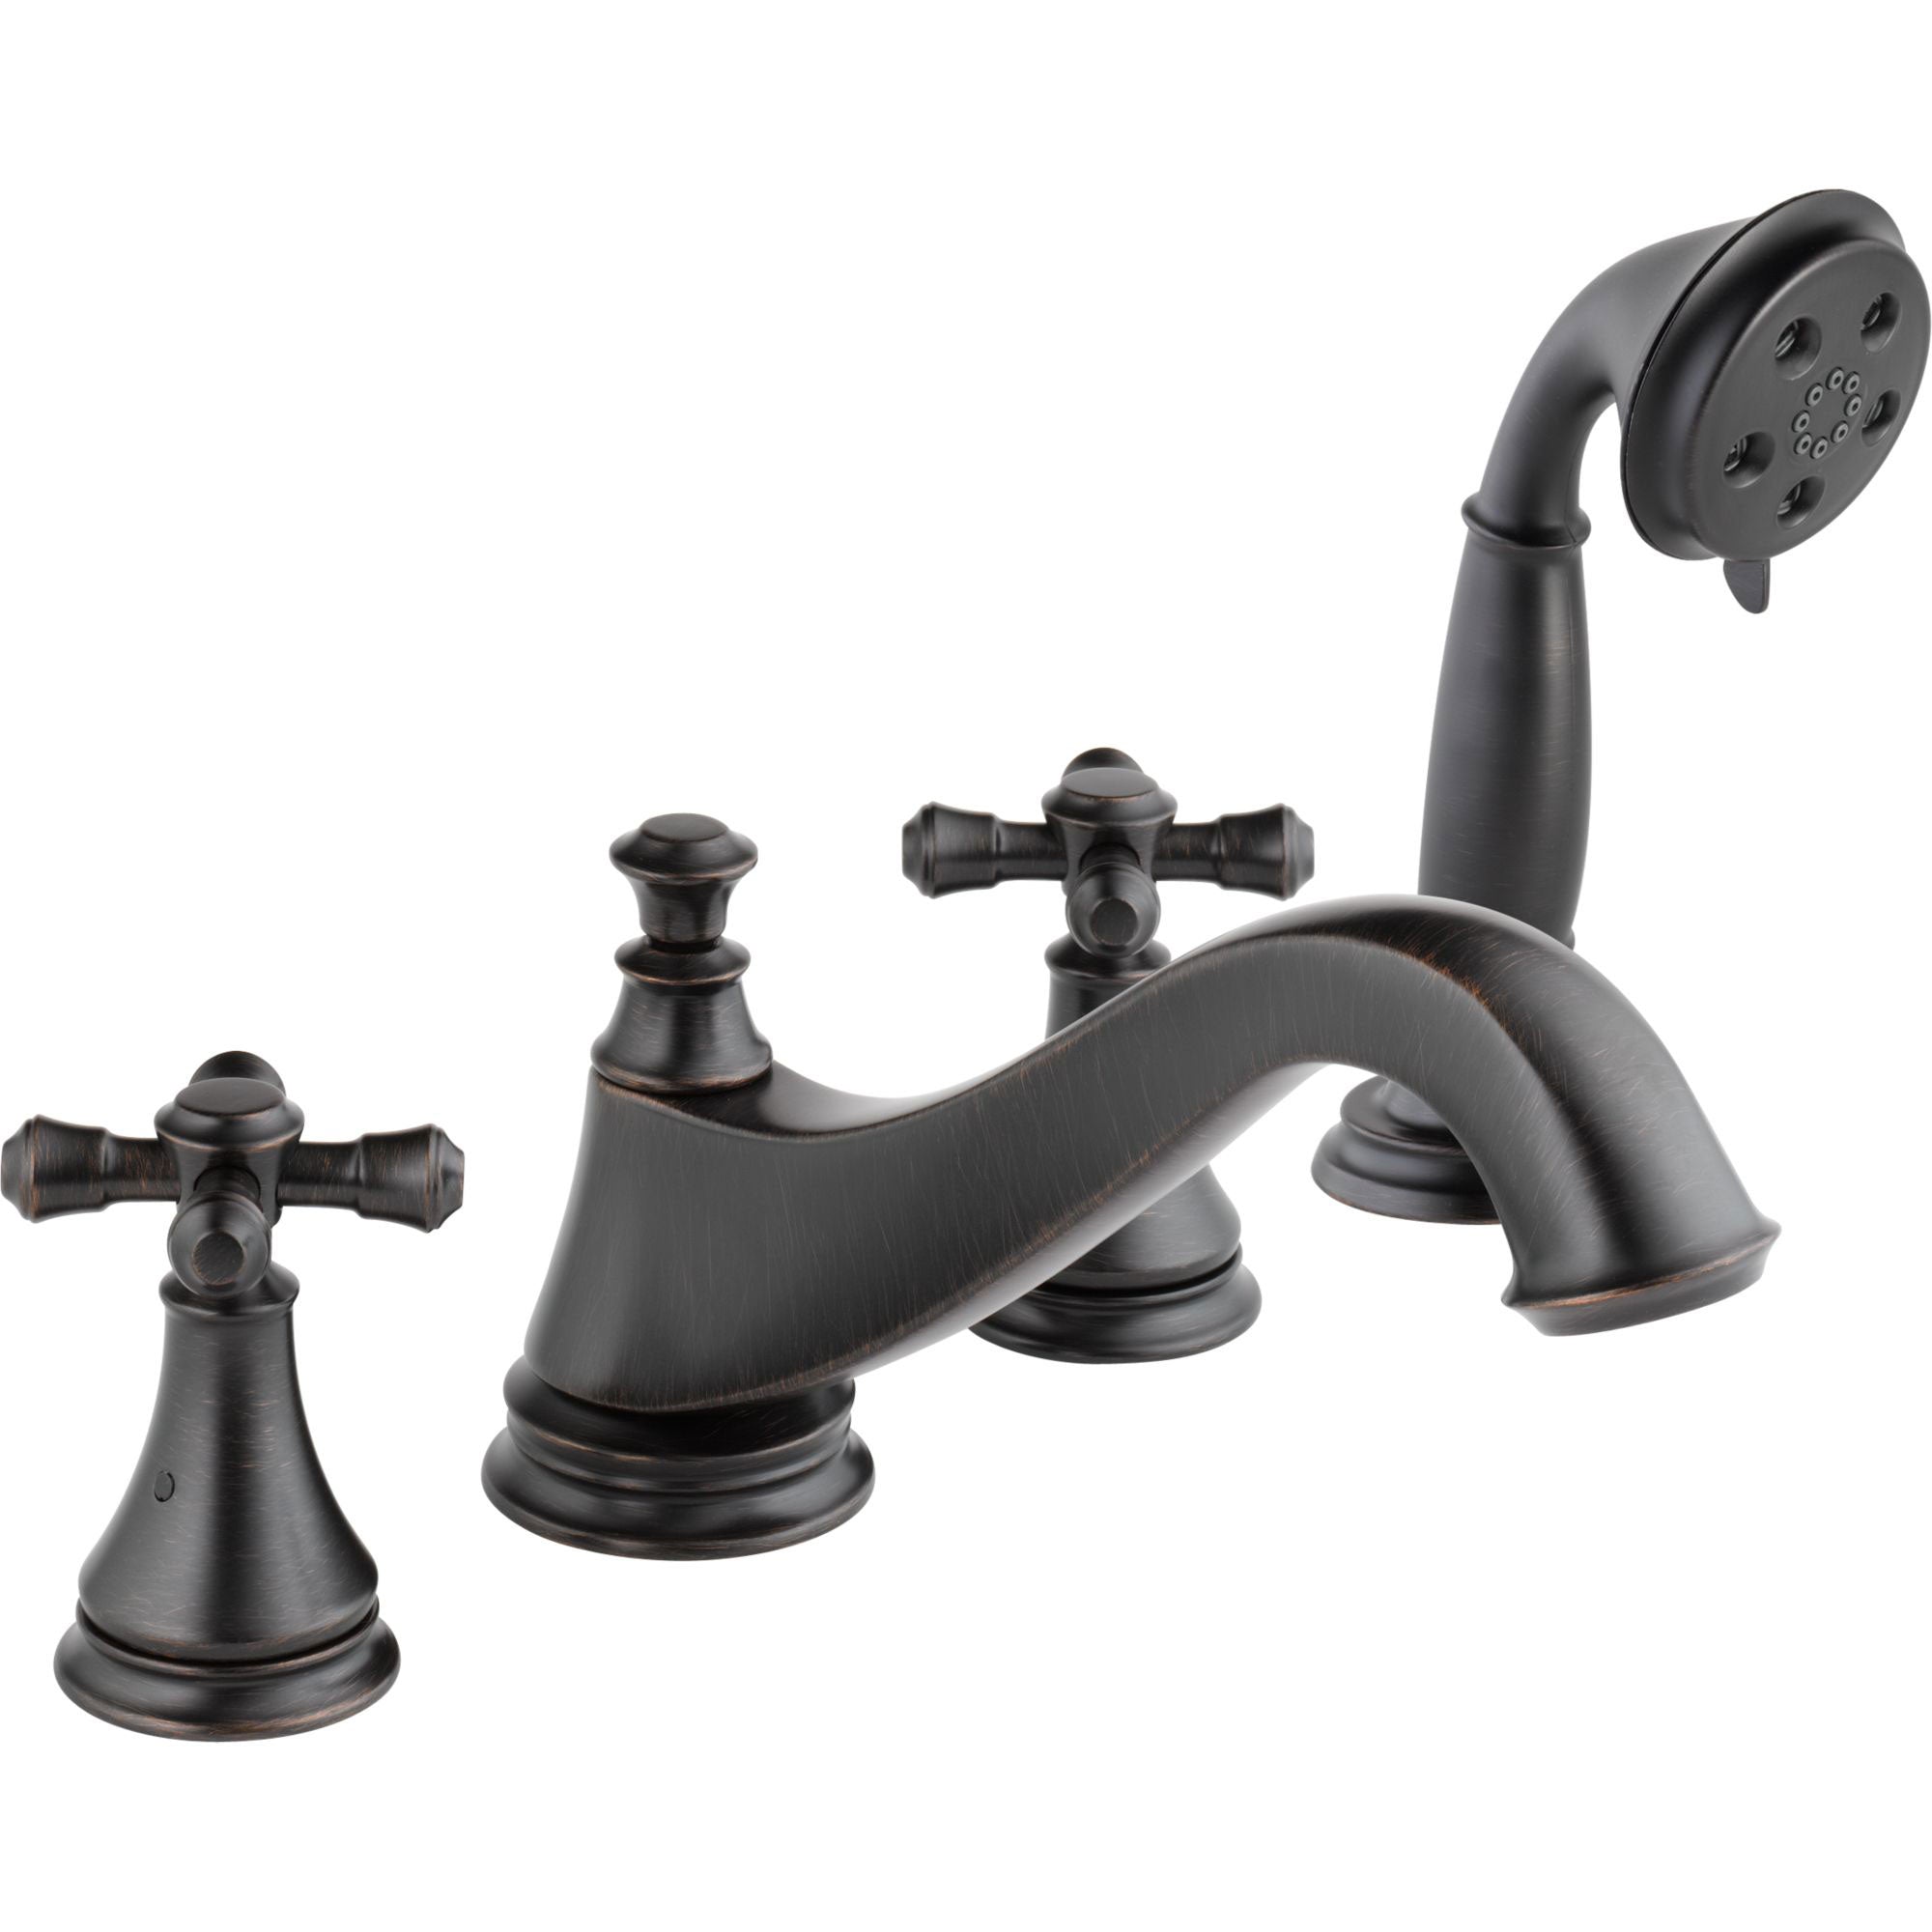 Delta Cassidy Venetian Bronze Low Arc Spout Roman Tub Filler Faucet with Hand Shower Spray INCLUDES Valve and Cross Handles D1070V